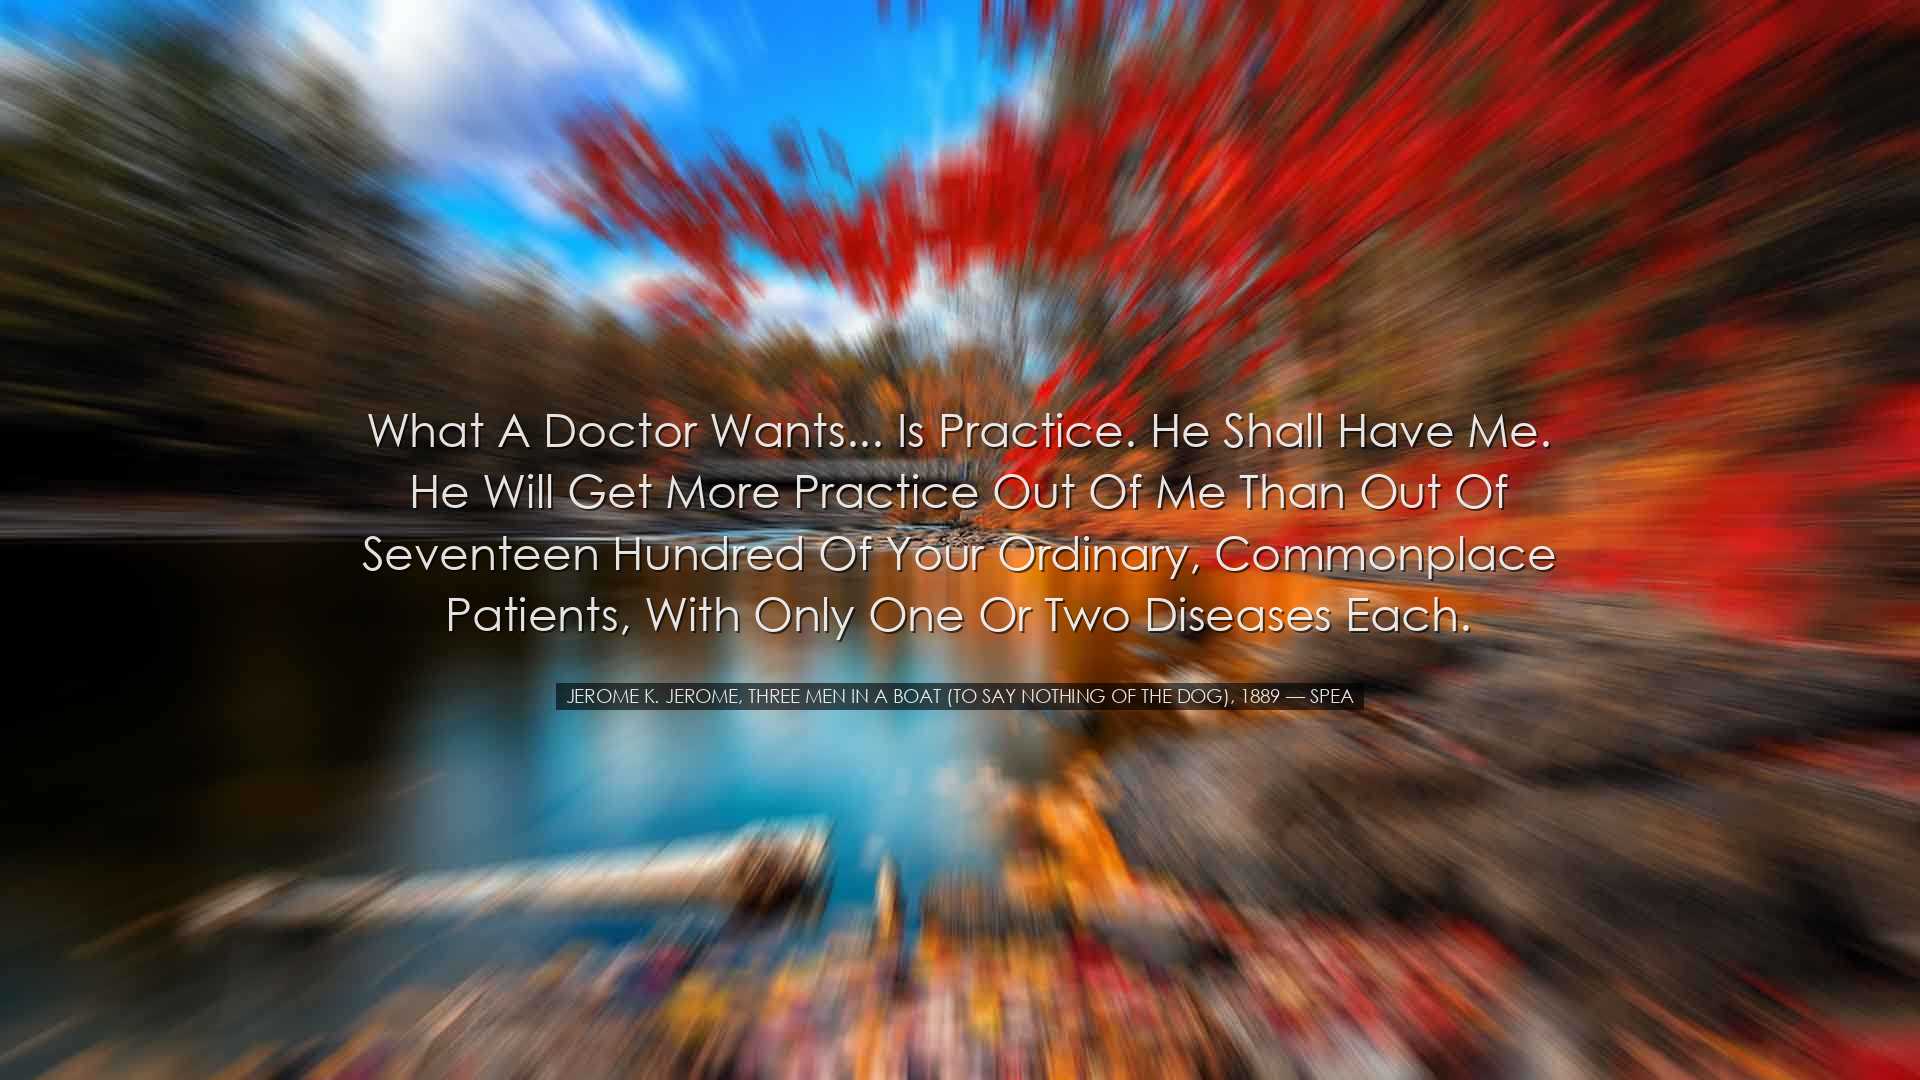 What a doctor wants... is practice. He shall have me. He will get